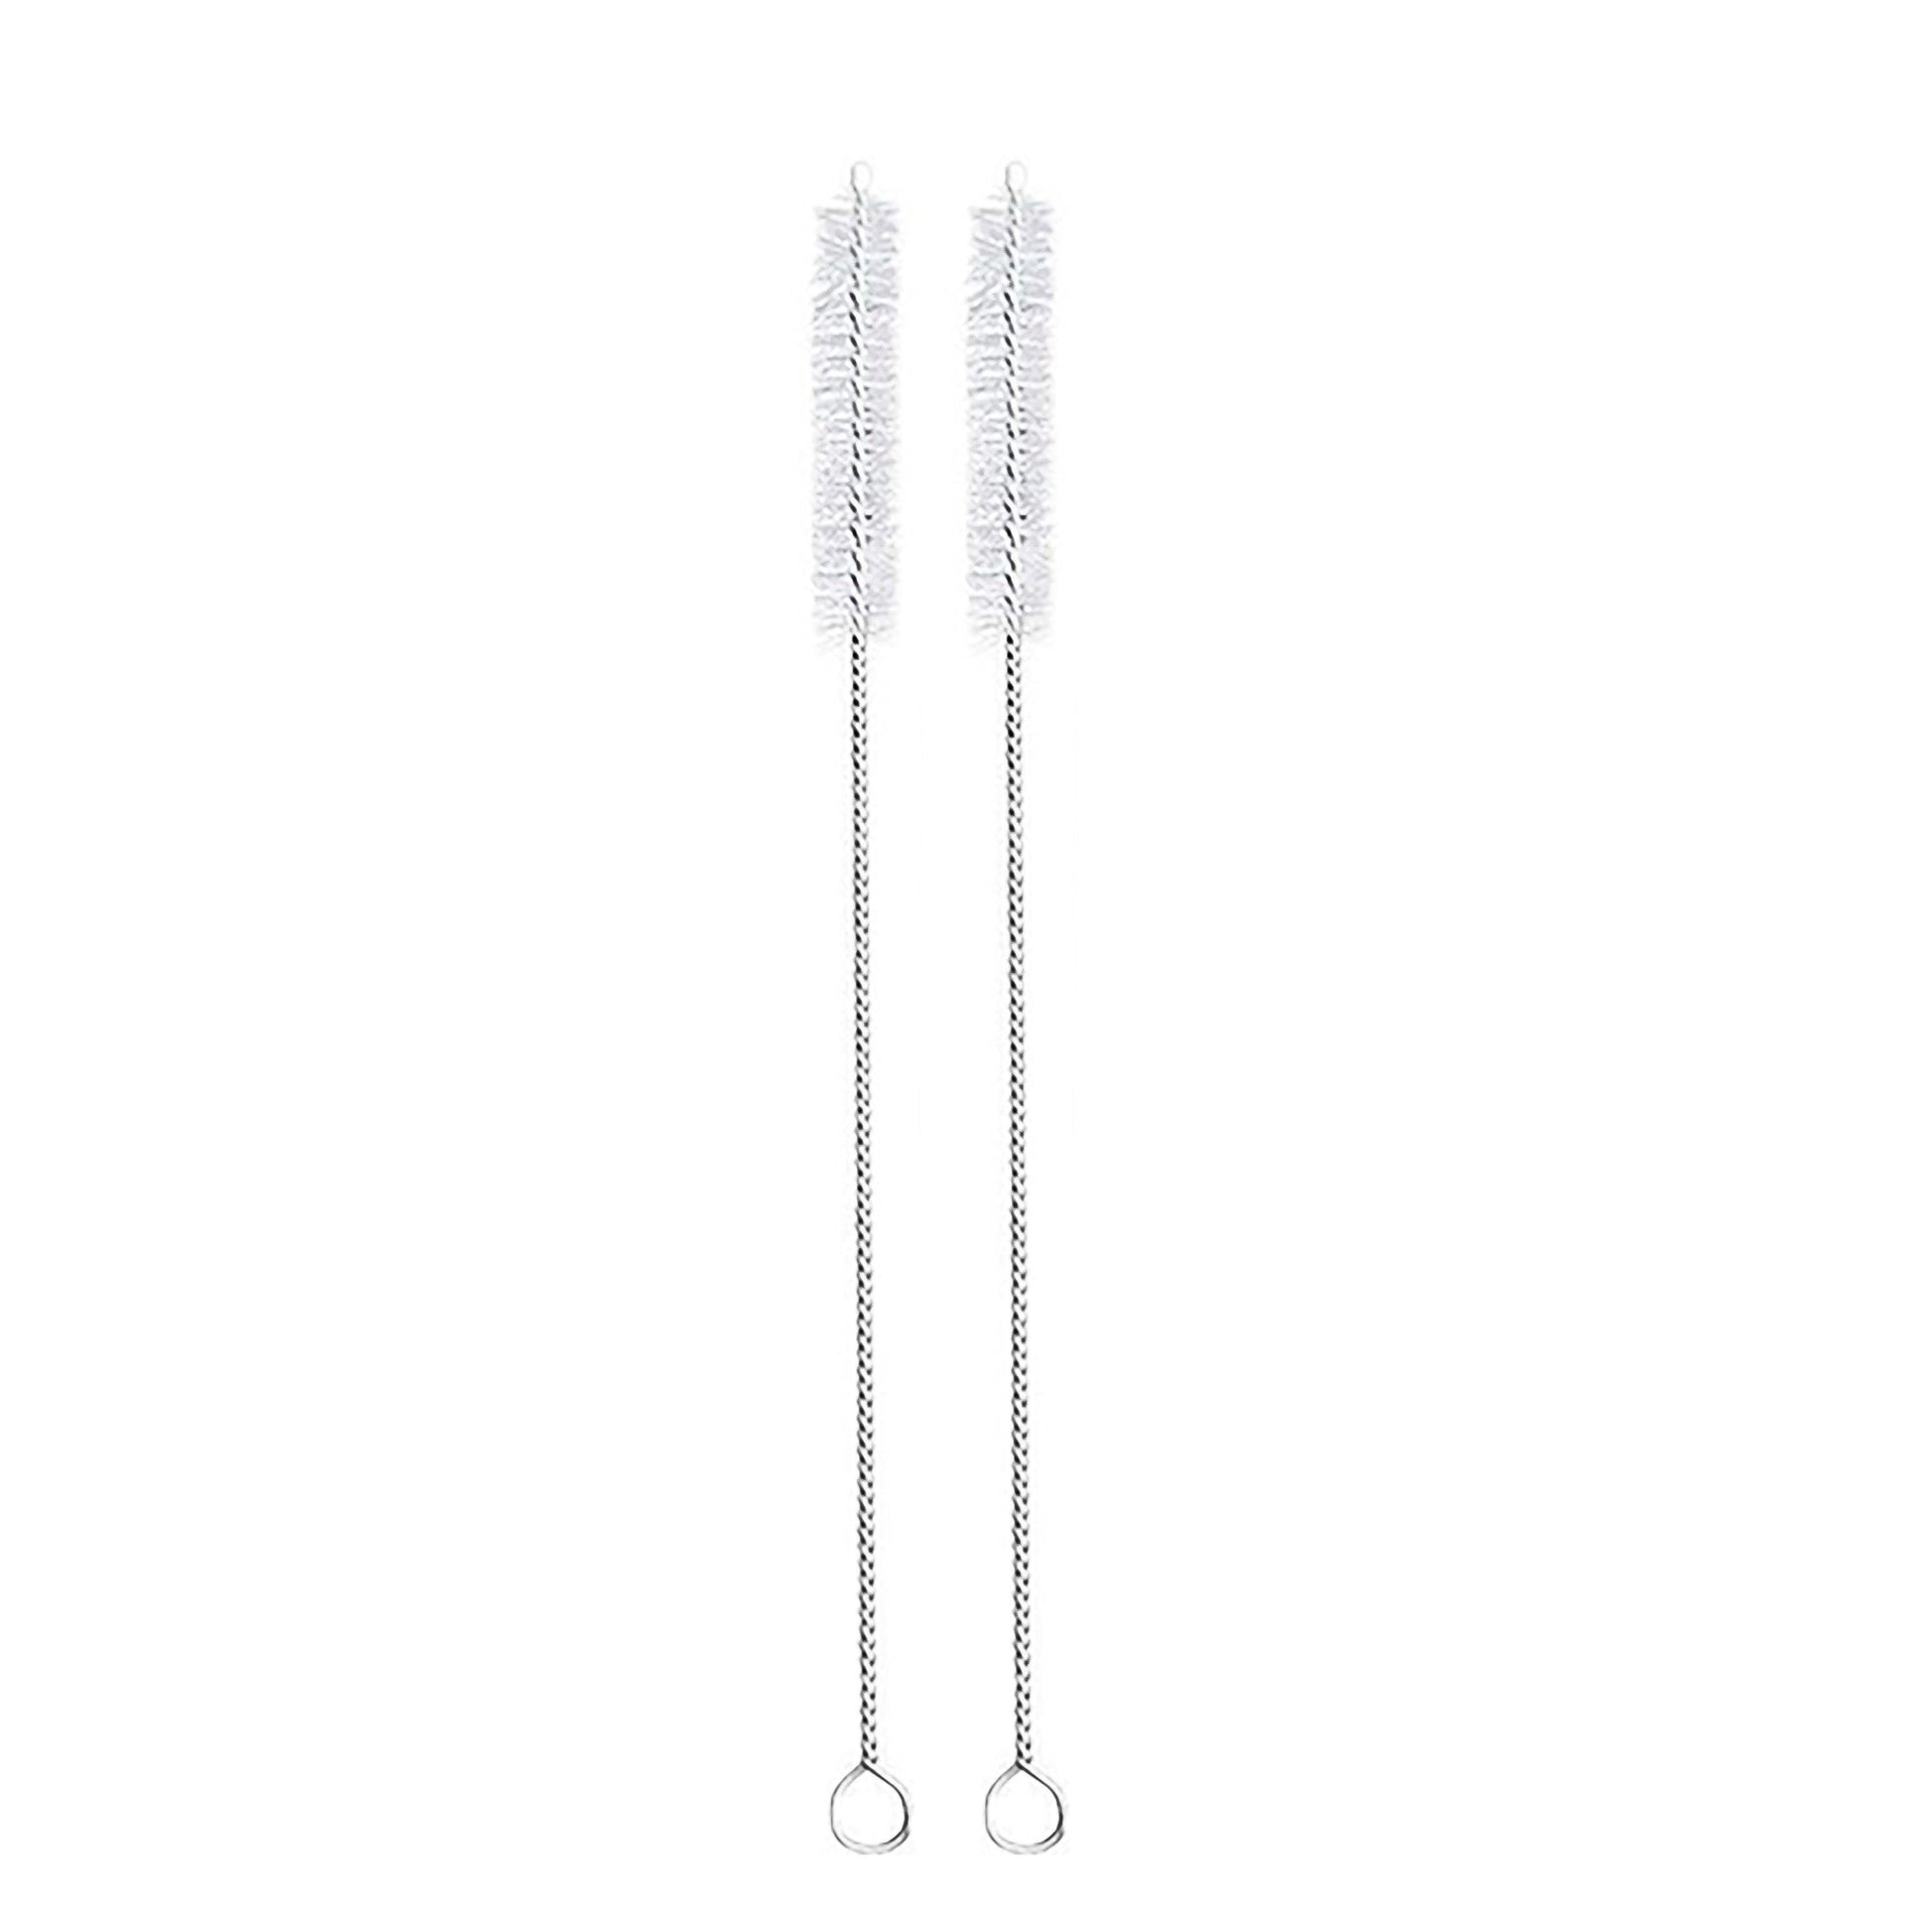 Bent Straw Pack with Vegan Cleaning Brush - Meals In Steel 